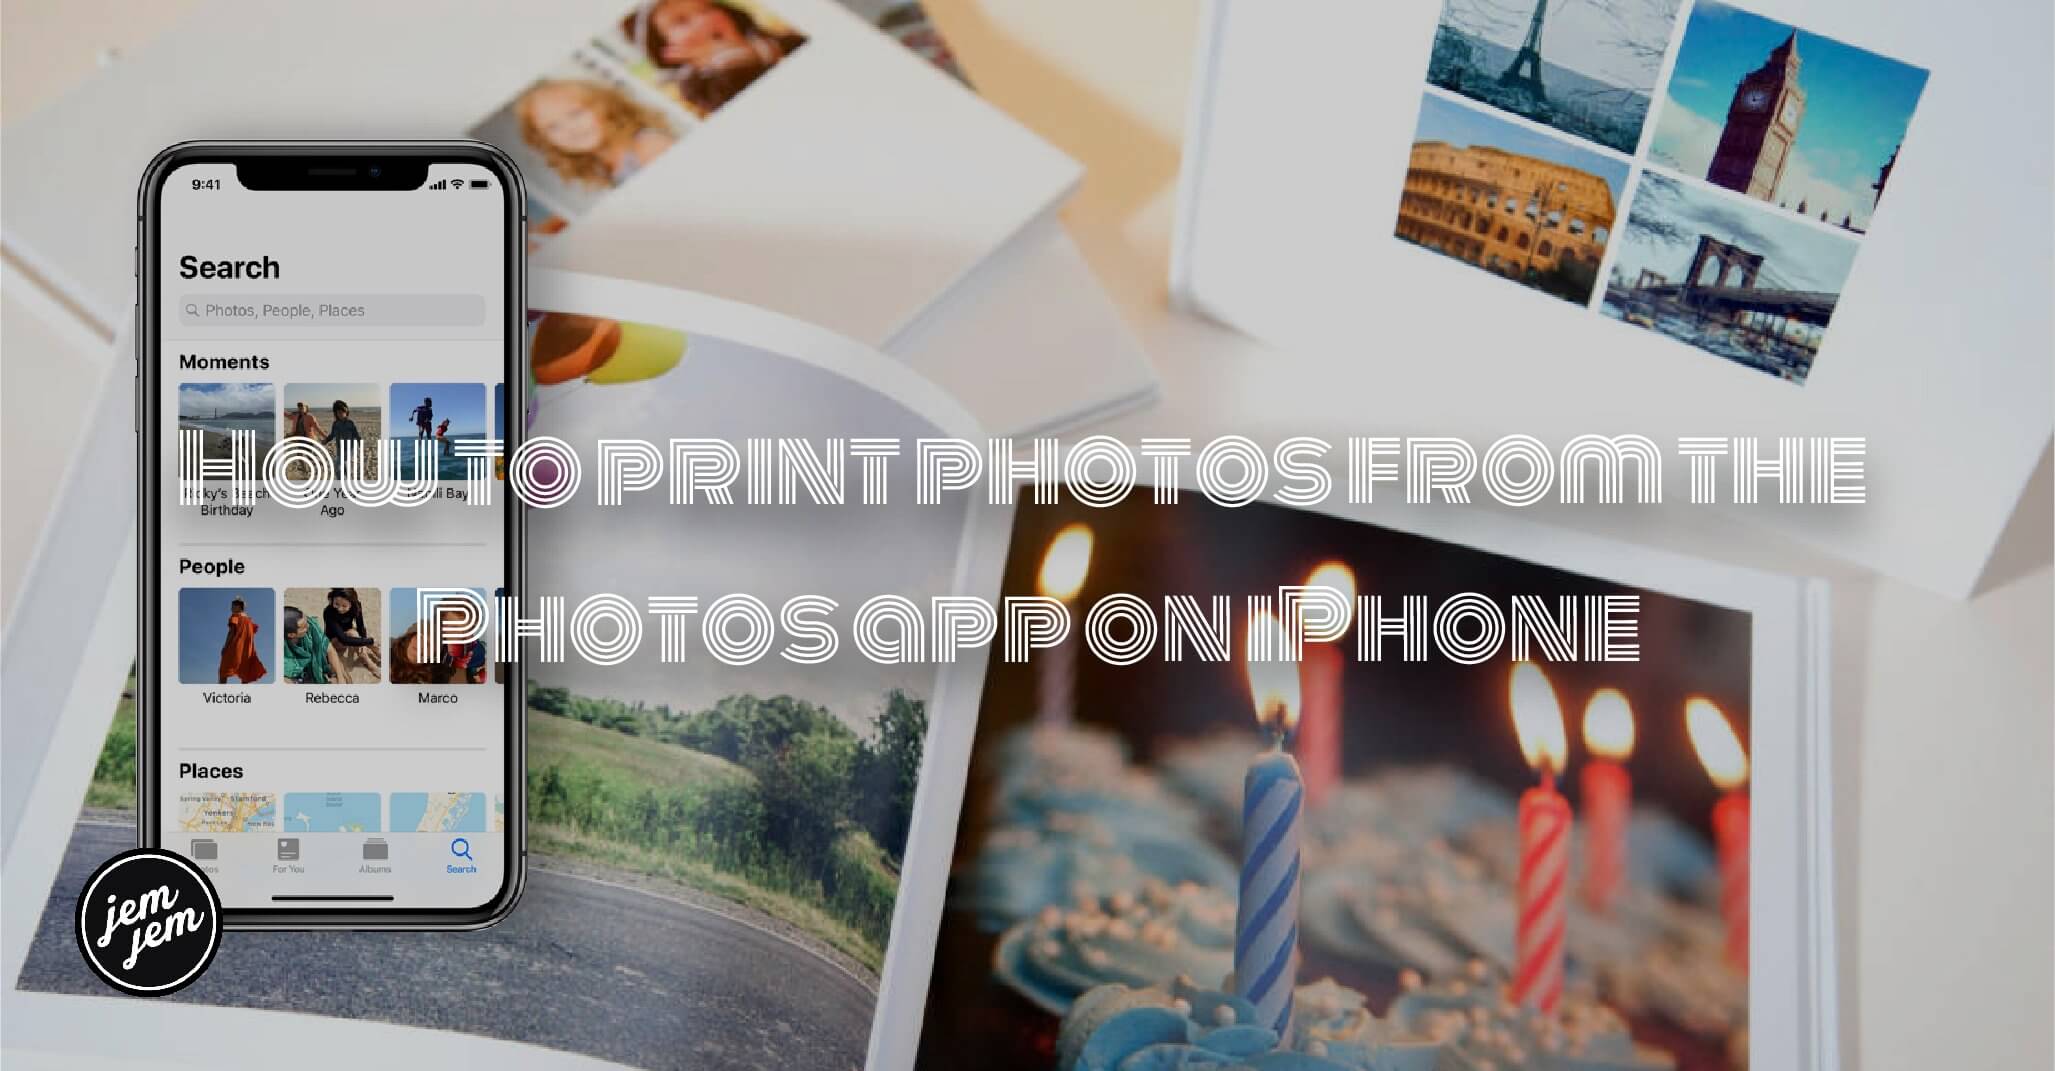 How to print photos from the Photos app on iPhone